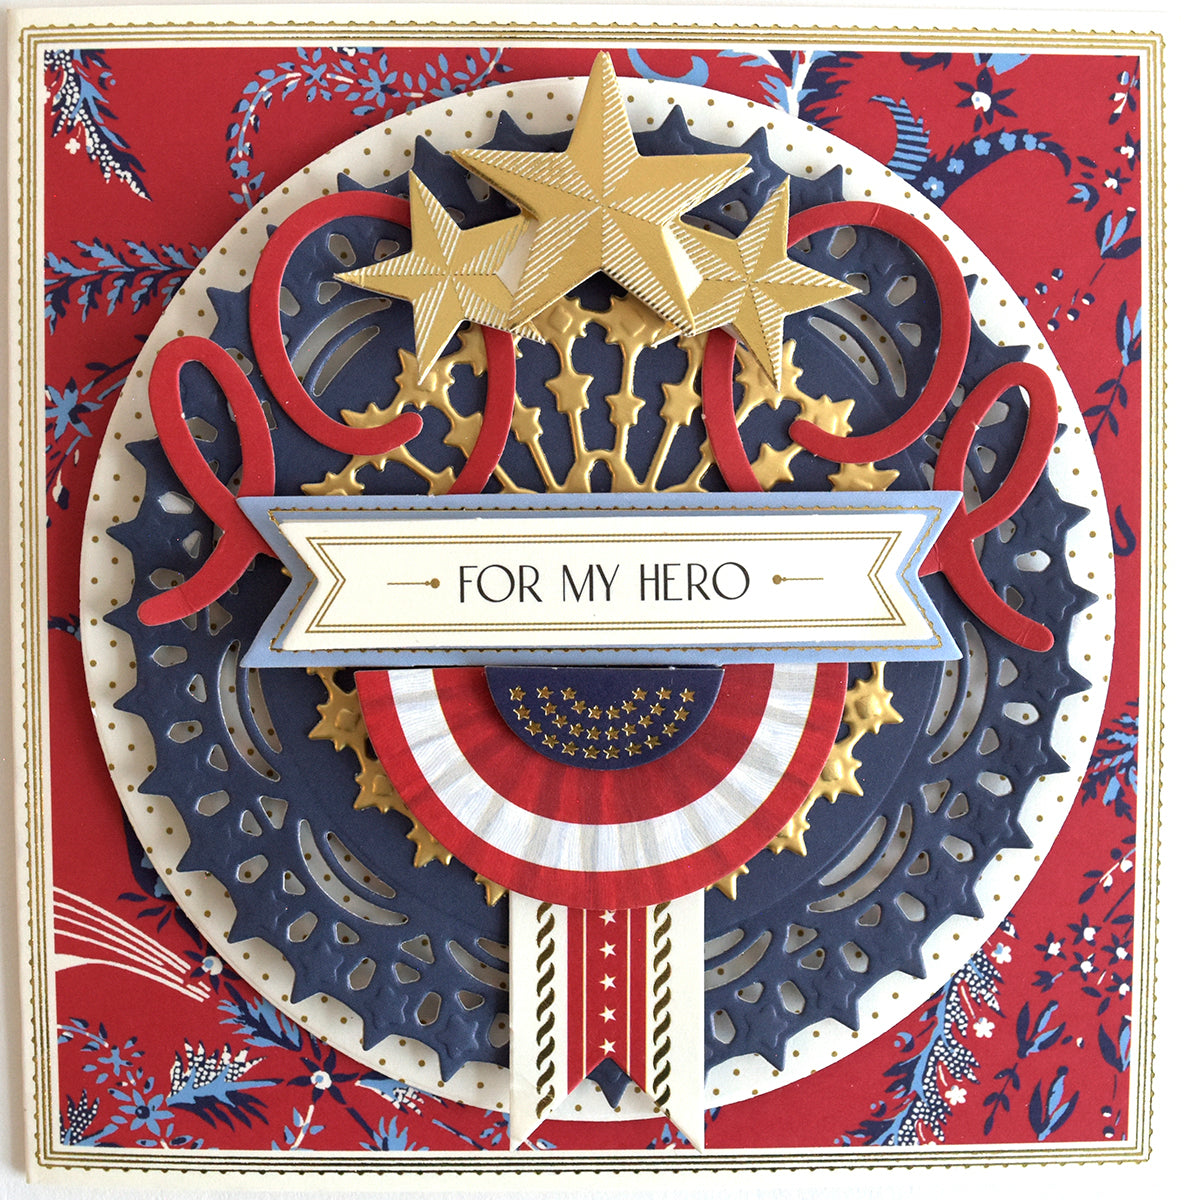 A decorative patriotic card featuring a central emblem with stars, stripes, and the text "for my hero" against a red and blue floral pattern, created using the Celebration Chest Embossing Folder with Dies.